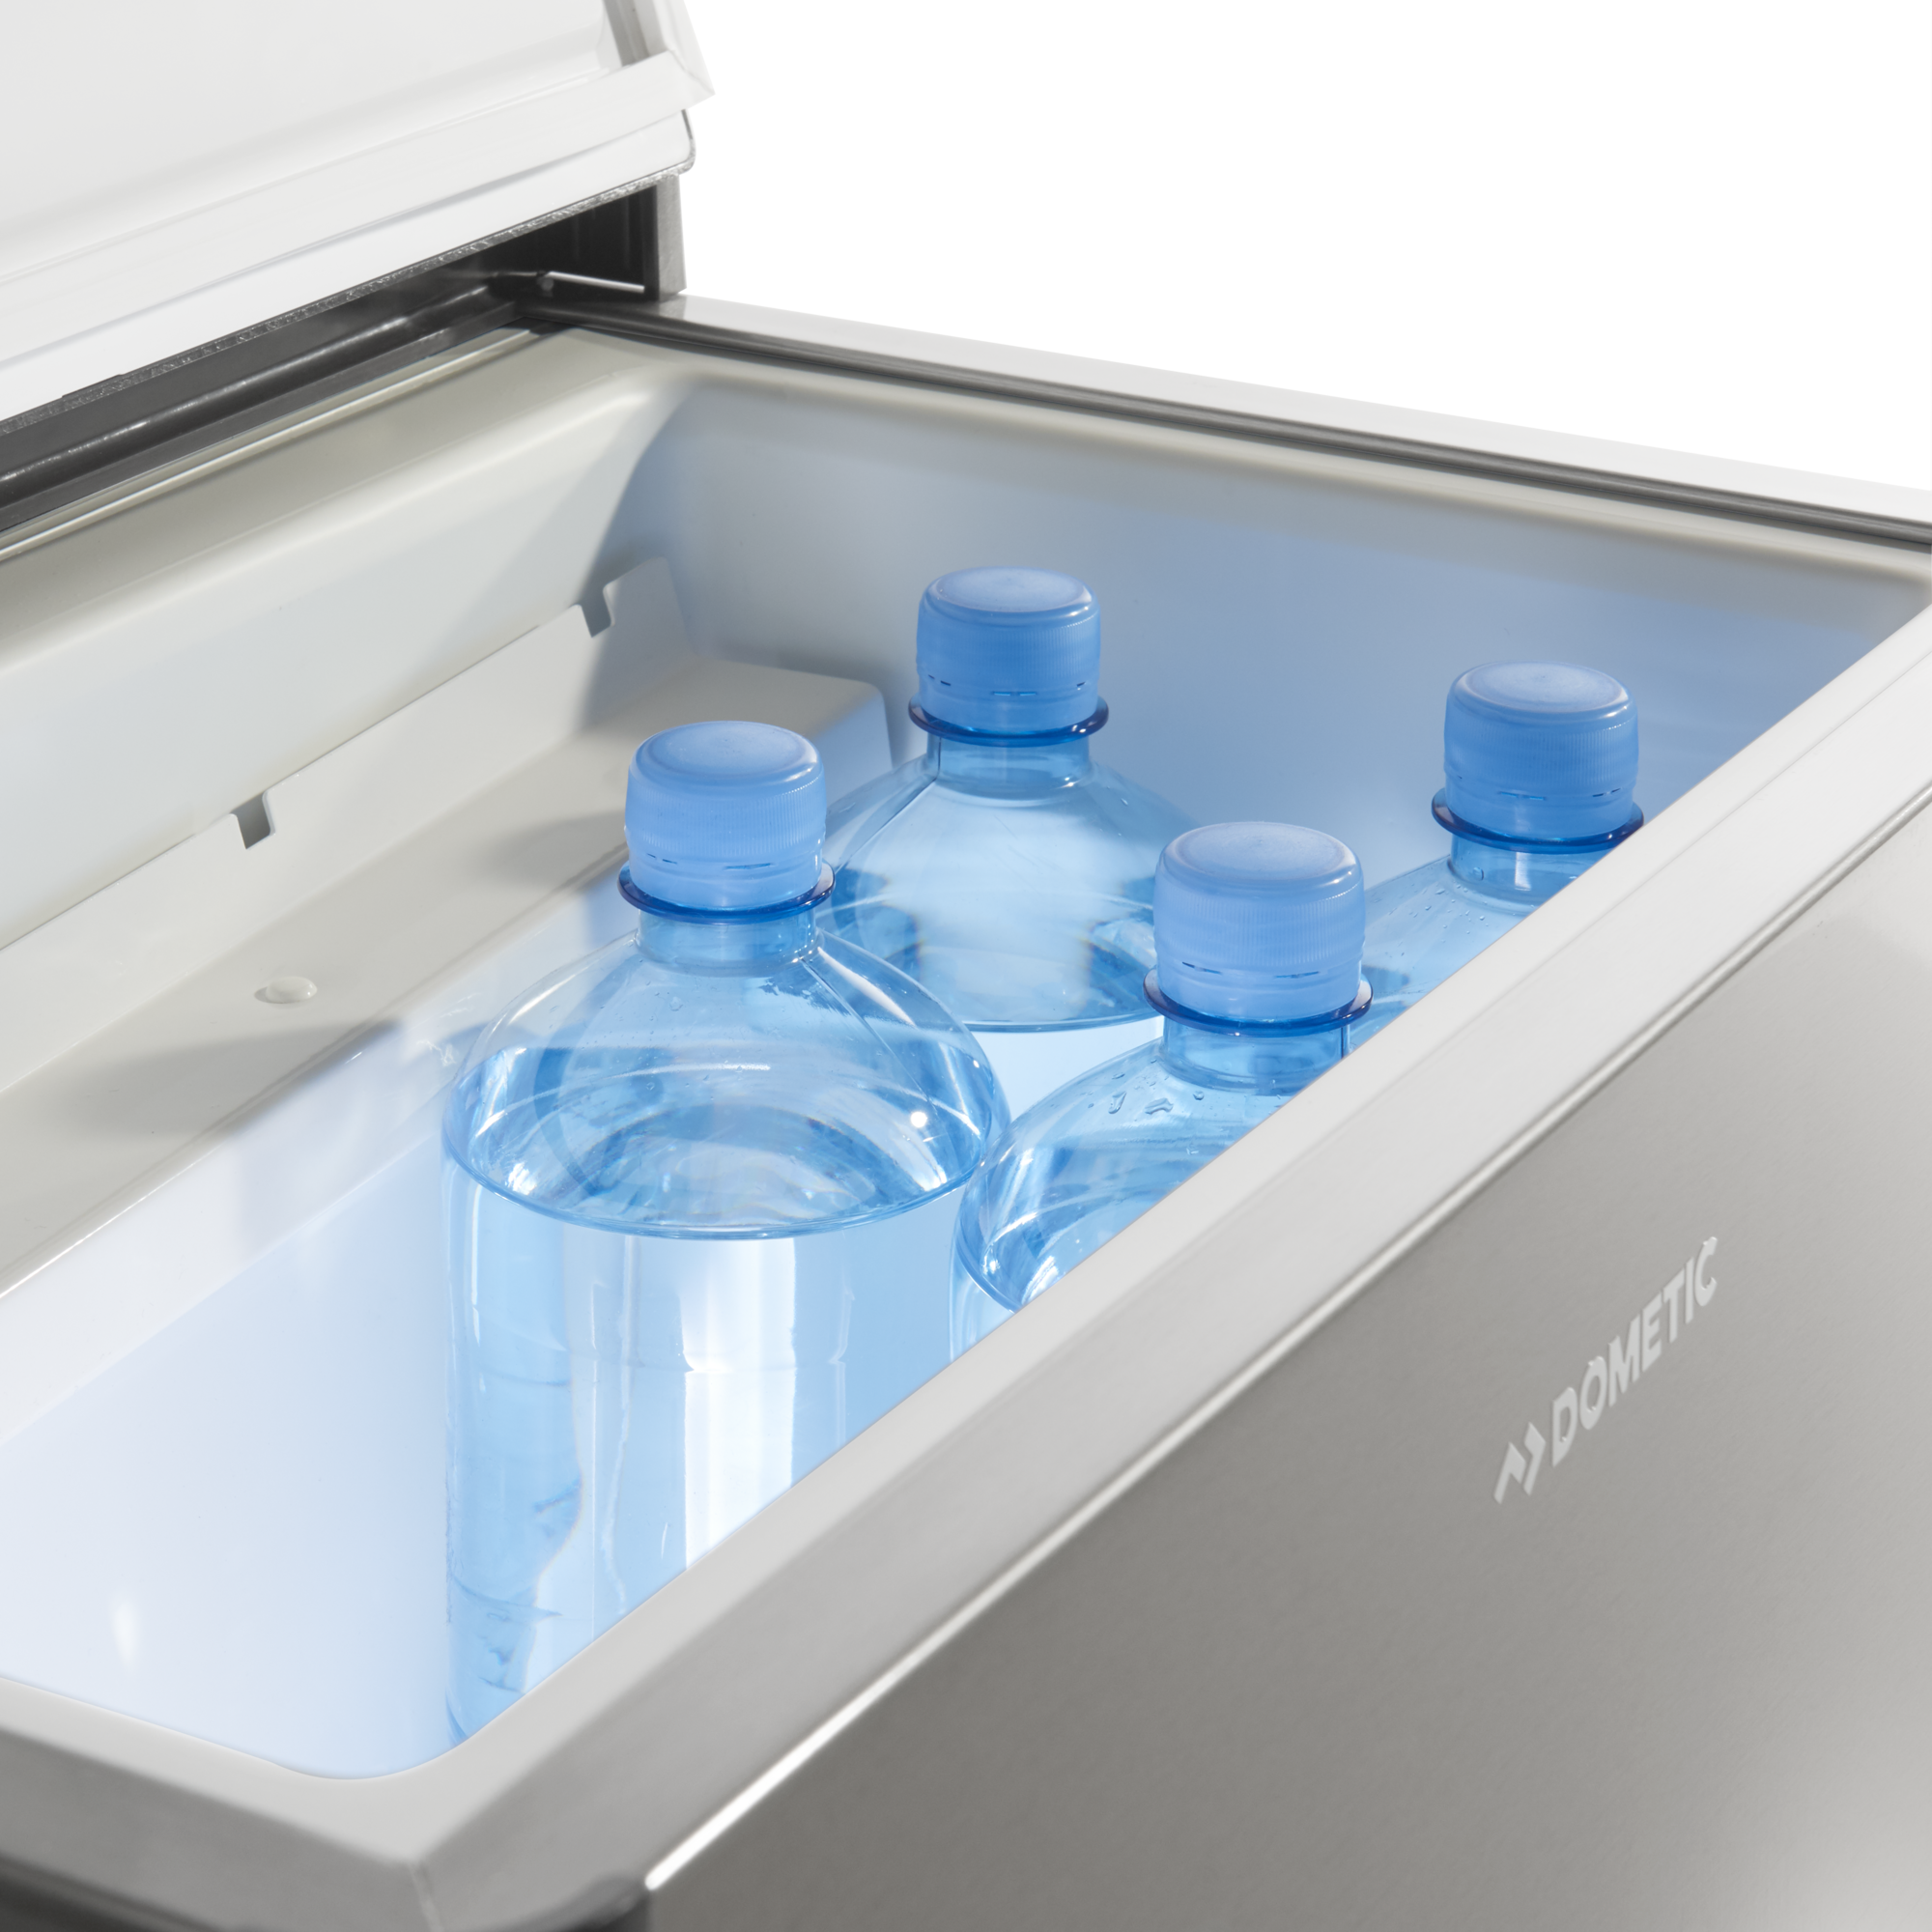 DOMETIC COMBICOOL ACX3 40G Absorption Coolbox interior with bottles